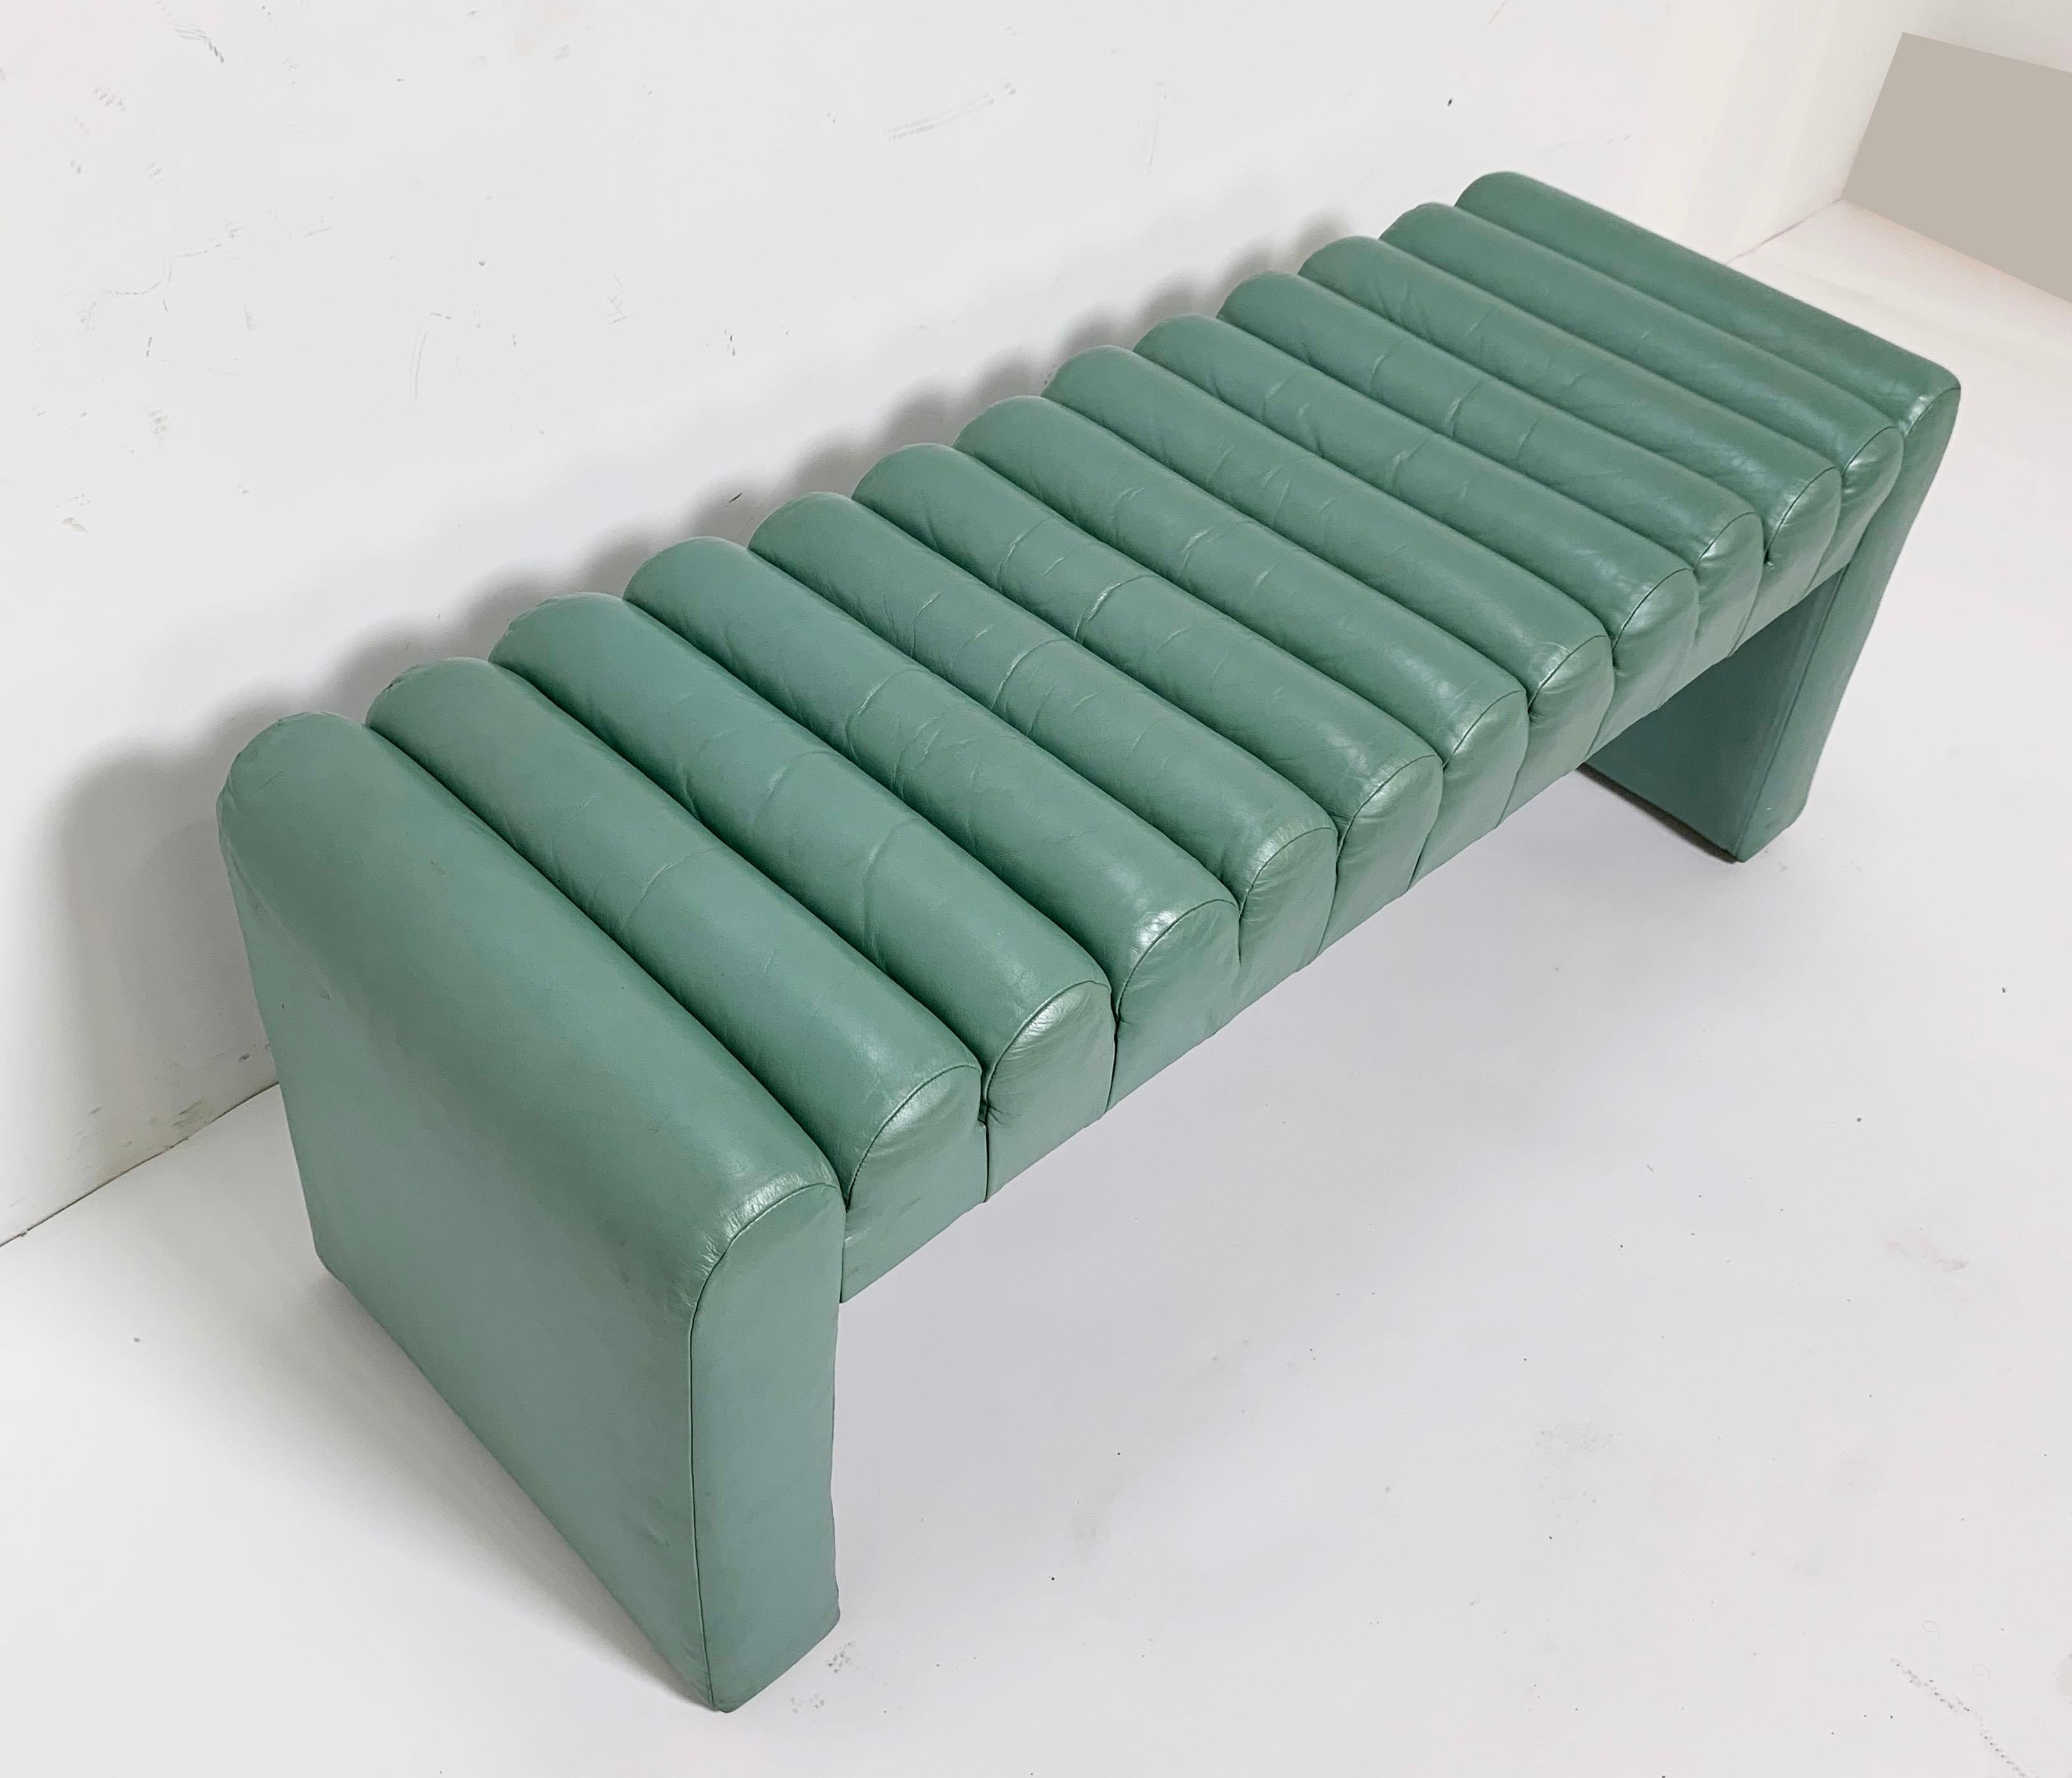 Post-Modern Postmodern Channel Form Leather Bench, circa 1980s